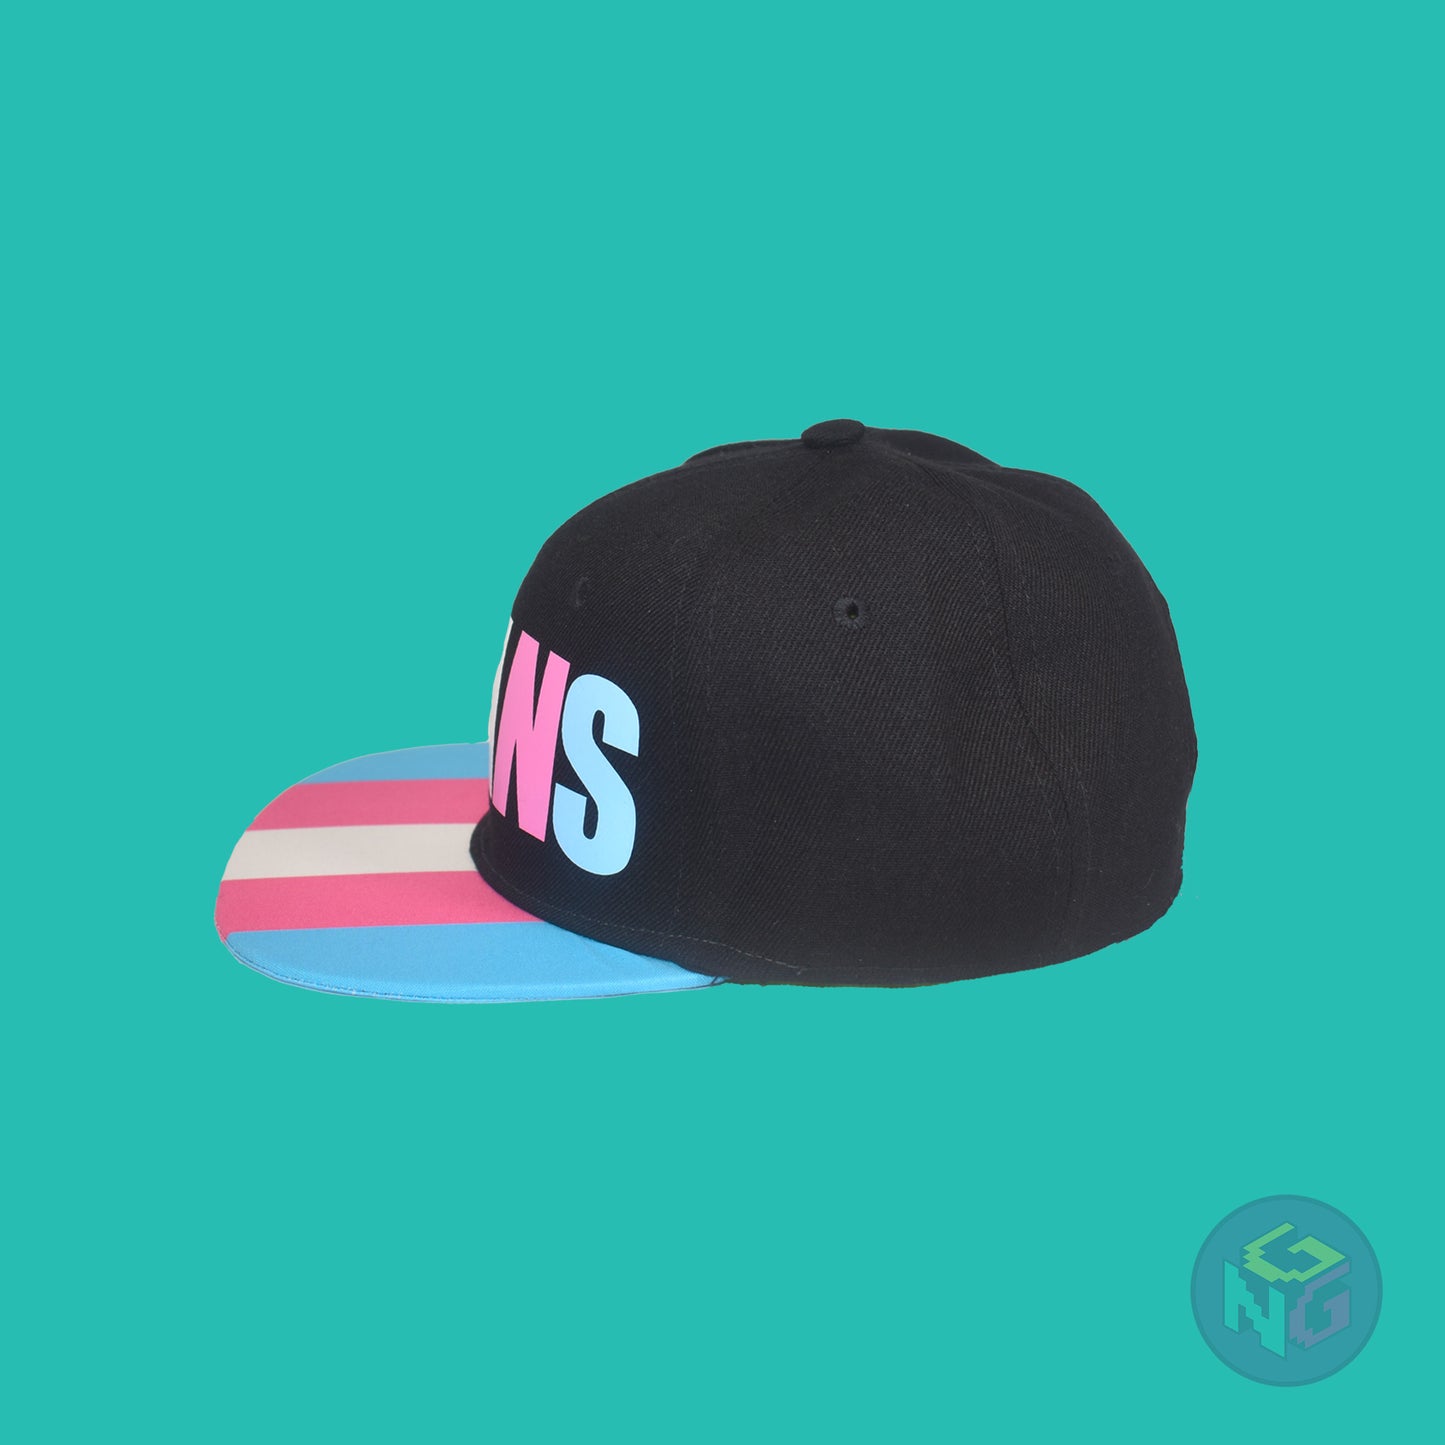 Black flat bill snapback hat. The brim has the transgender pride flag on both sides and the front of the hat has the word “TRANS” in blue, pink, and white letters. Left view